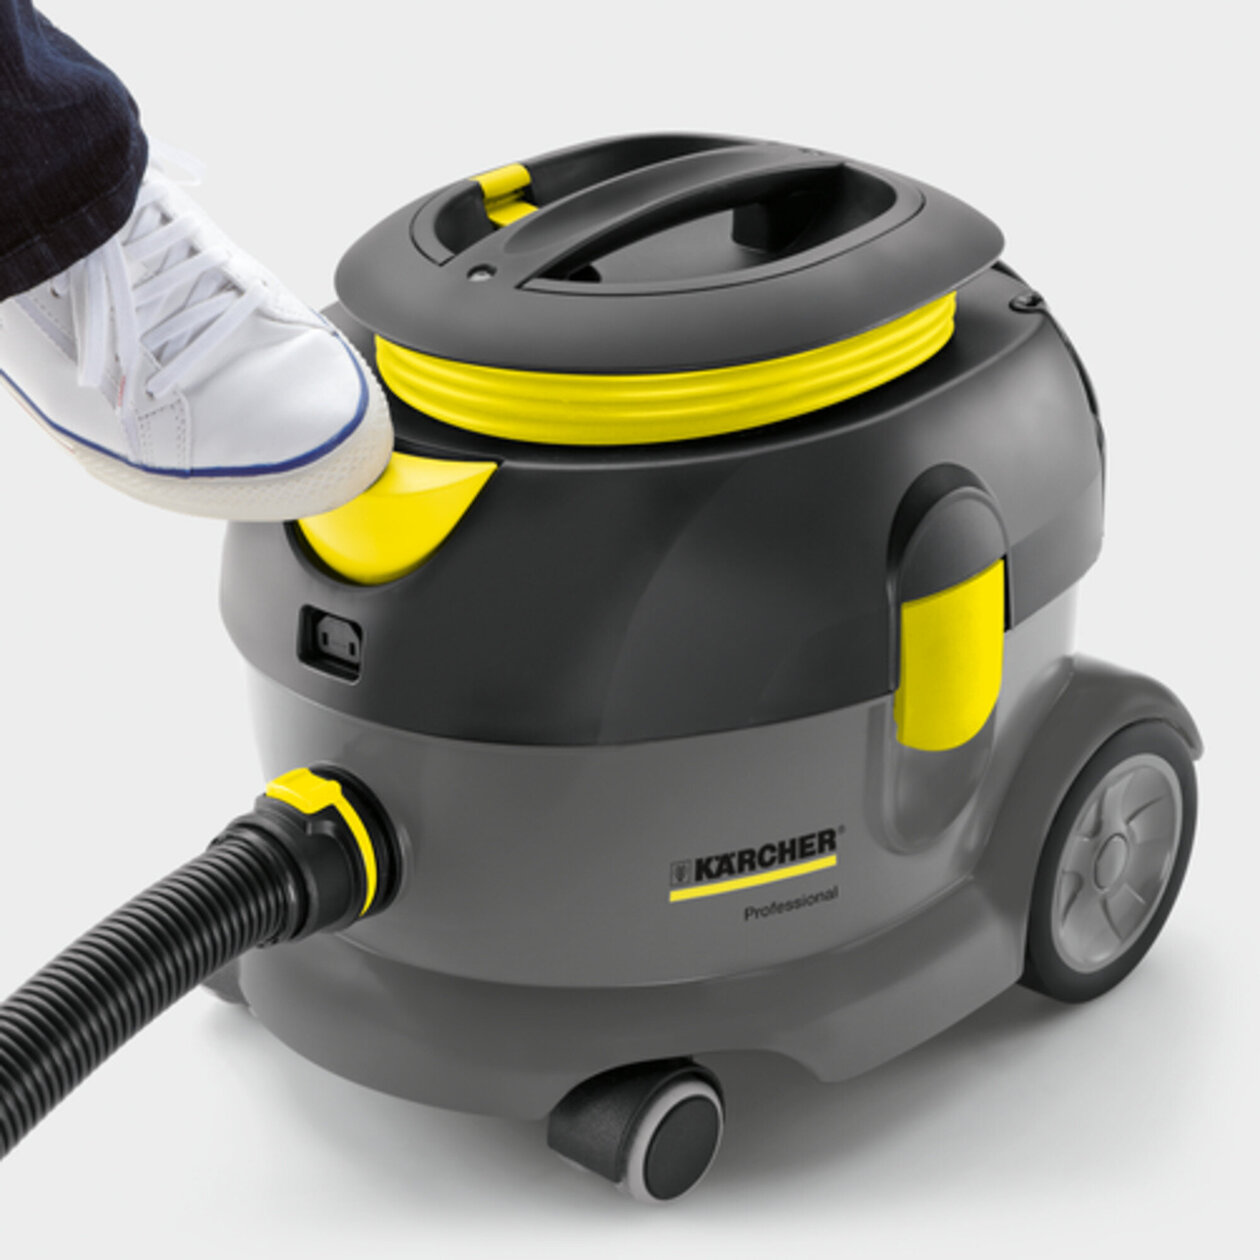 Dry vacuum cleaner T 12/1 400Hz: Foot switch for added convenience